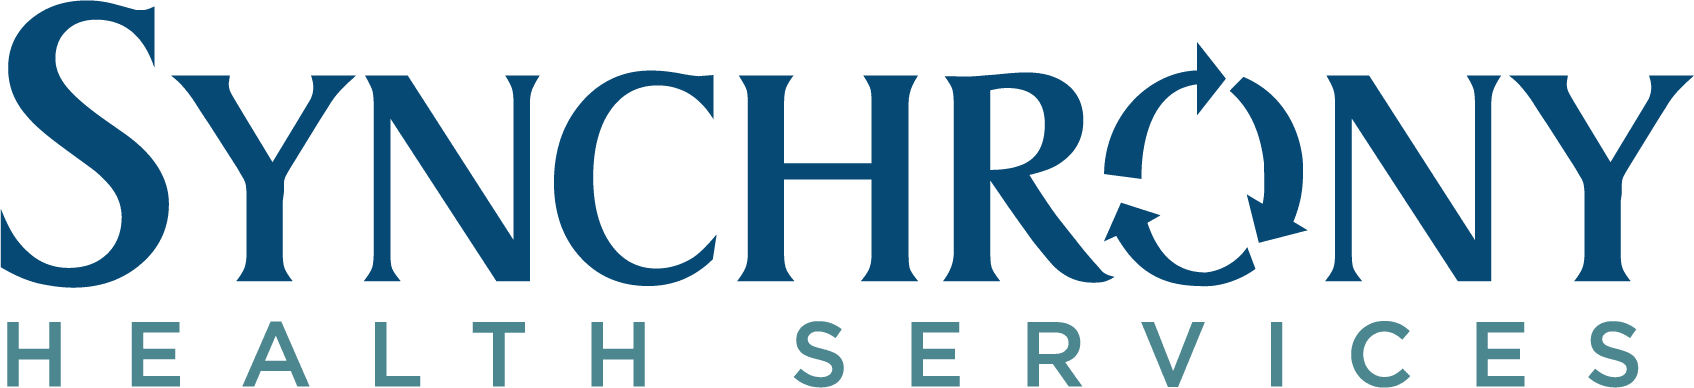 Synchrony Health Services from Triple Creek Retirement Community